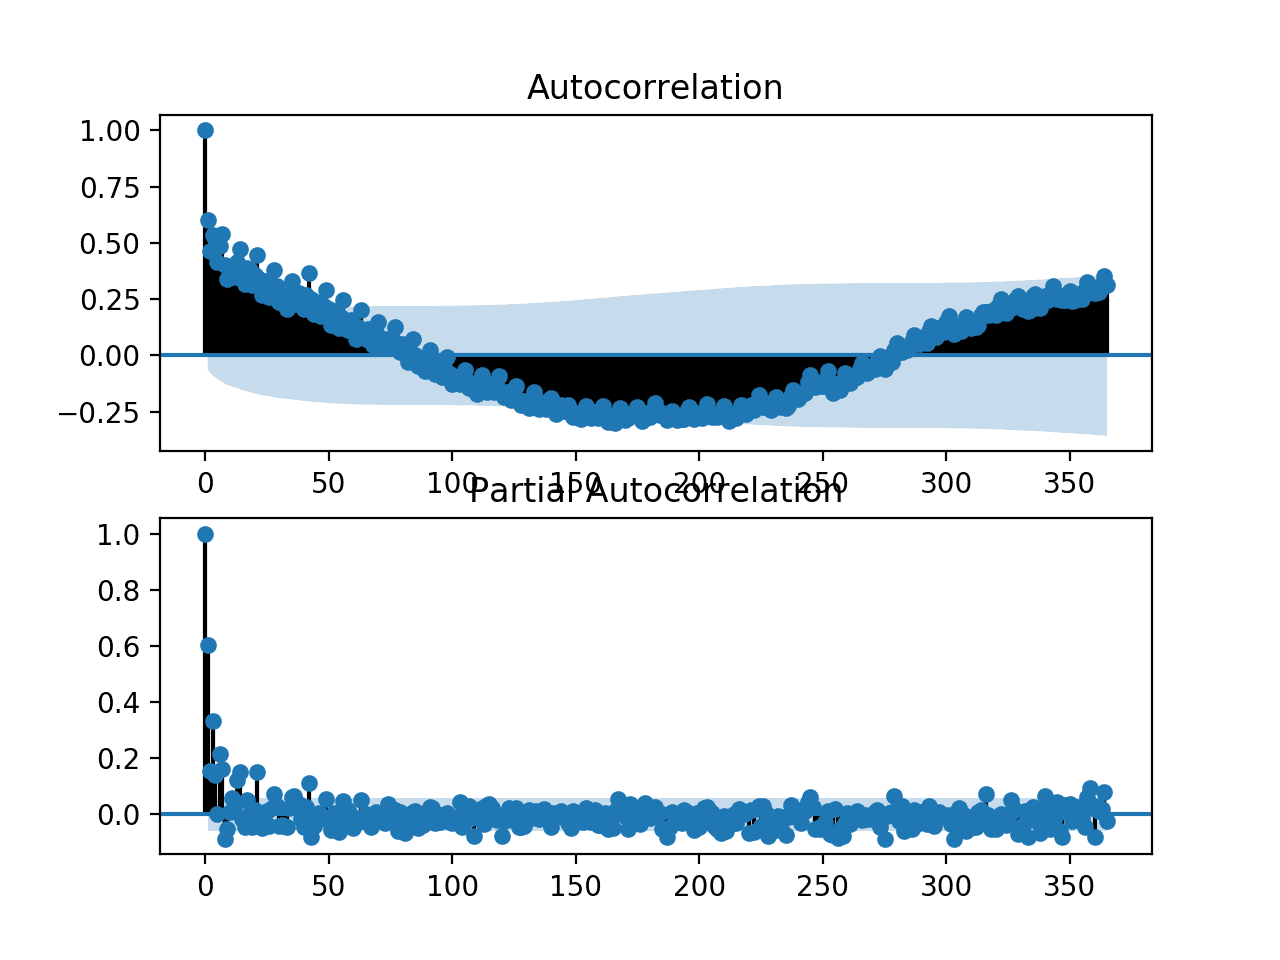 ACF and PACF plots for the univariate series of power consumption